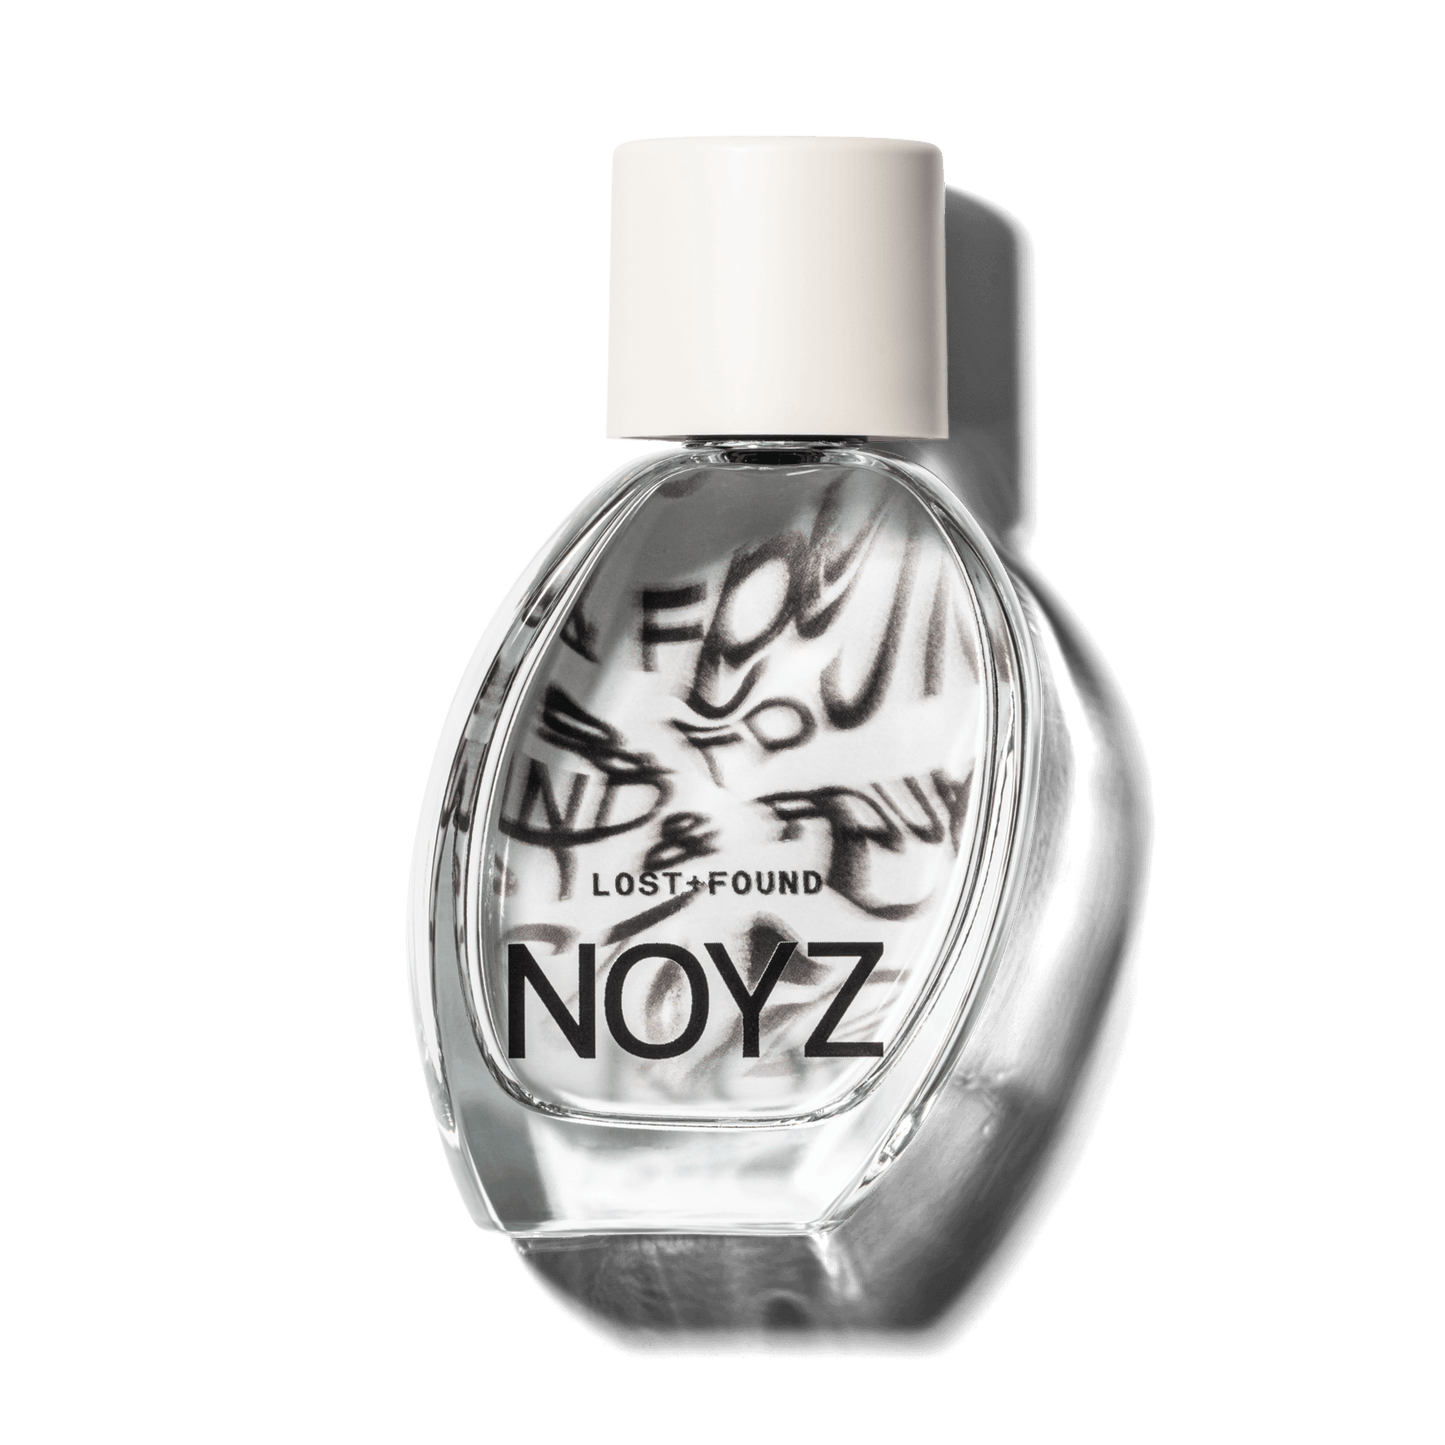 A glass bottle of NOYZ perfume Lost & Found with citrus scent. Discover the best unisex scents.